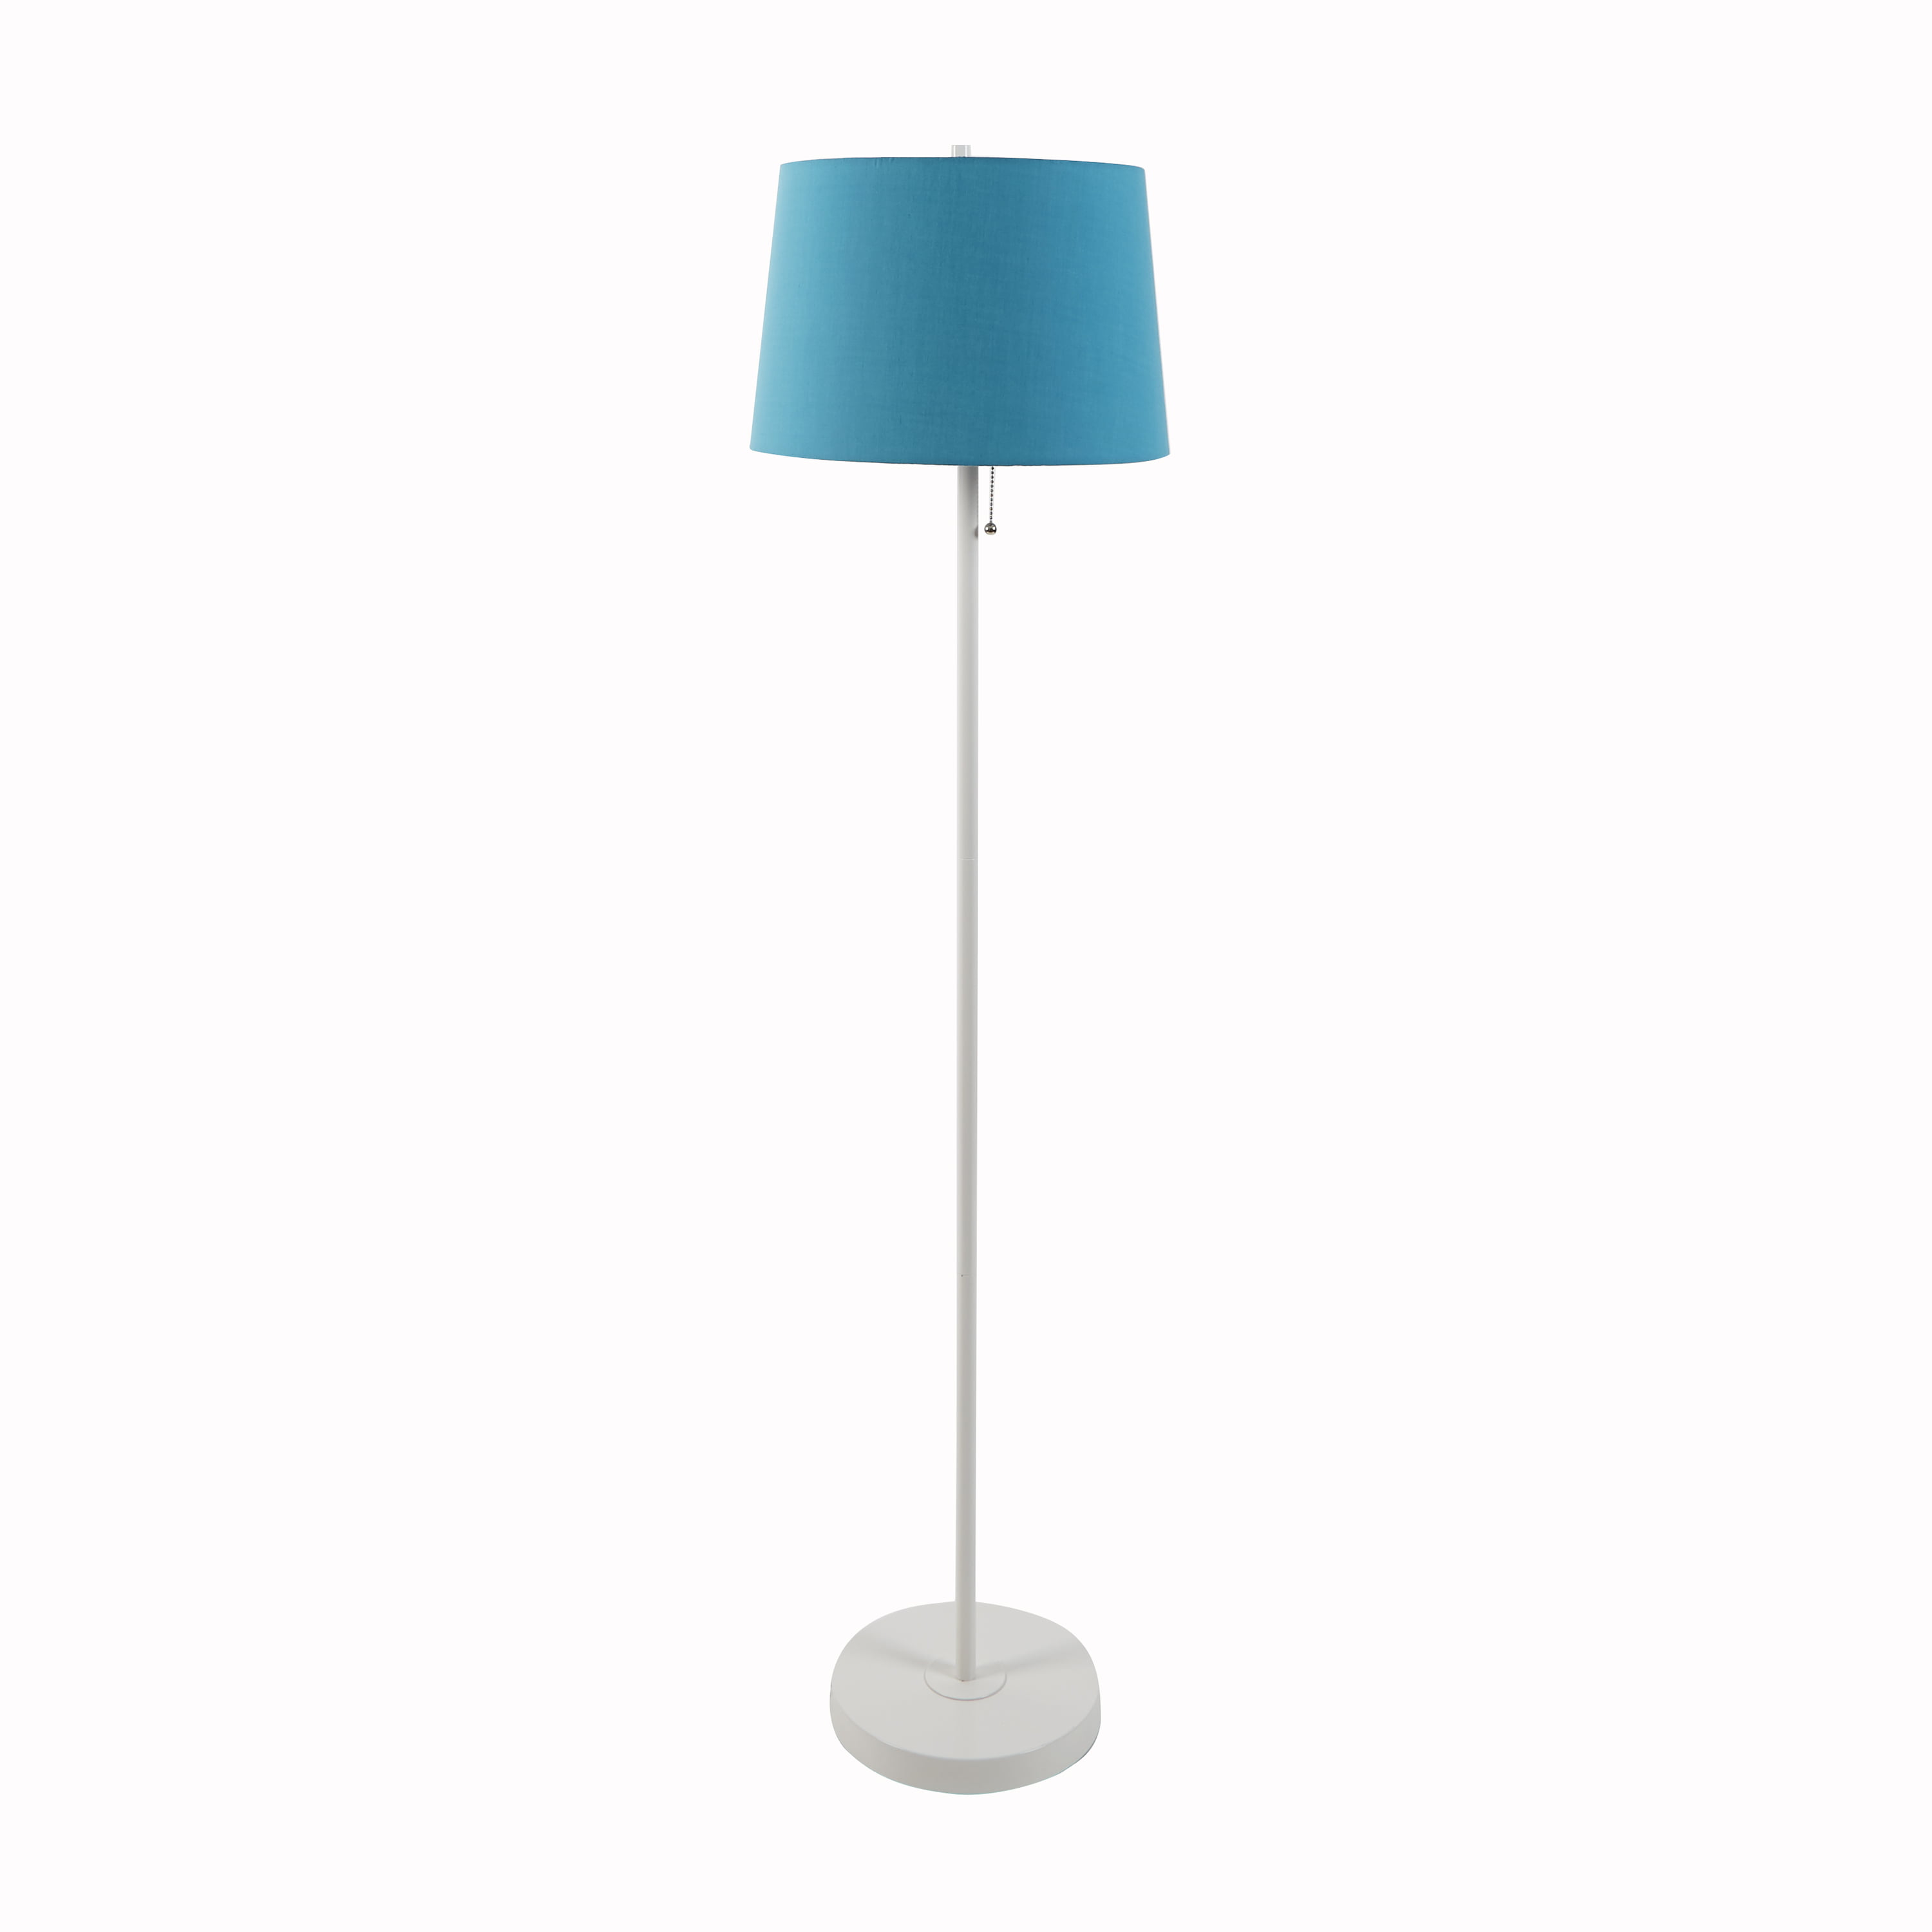 Your Zone 58 White Stick Floor Lamp With Teal Shade Walmart Com Walmart Com